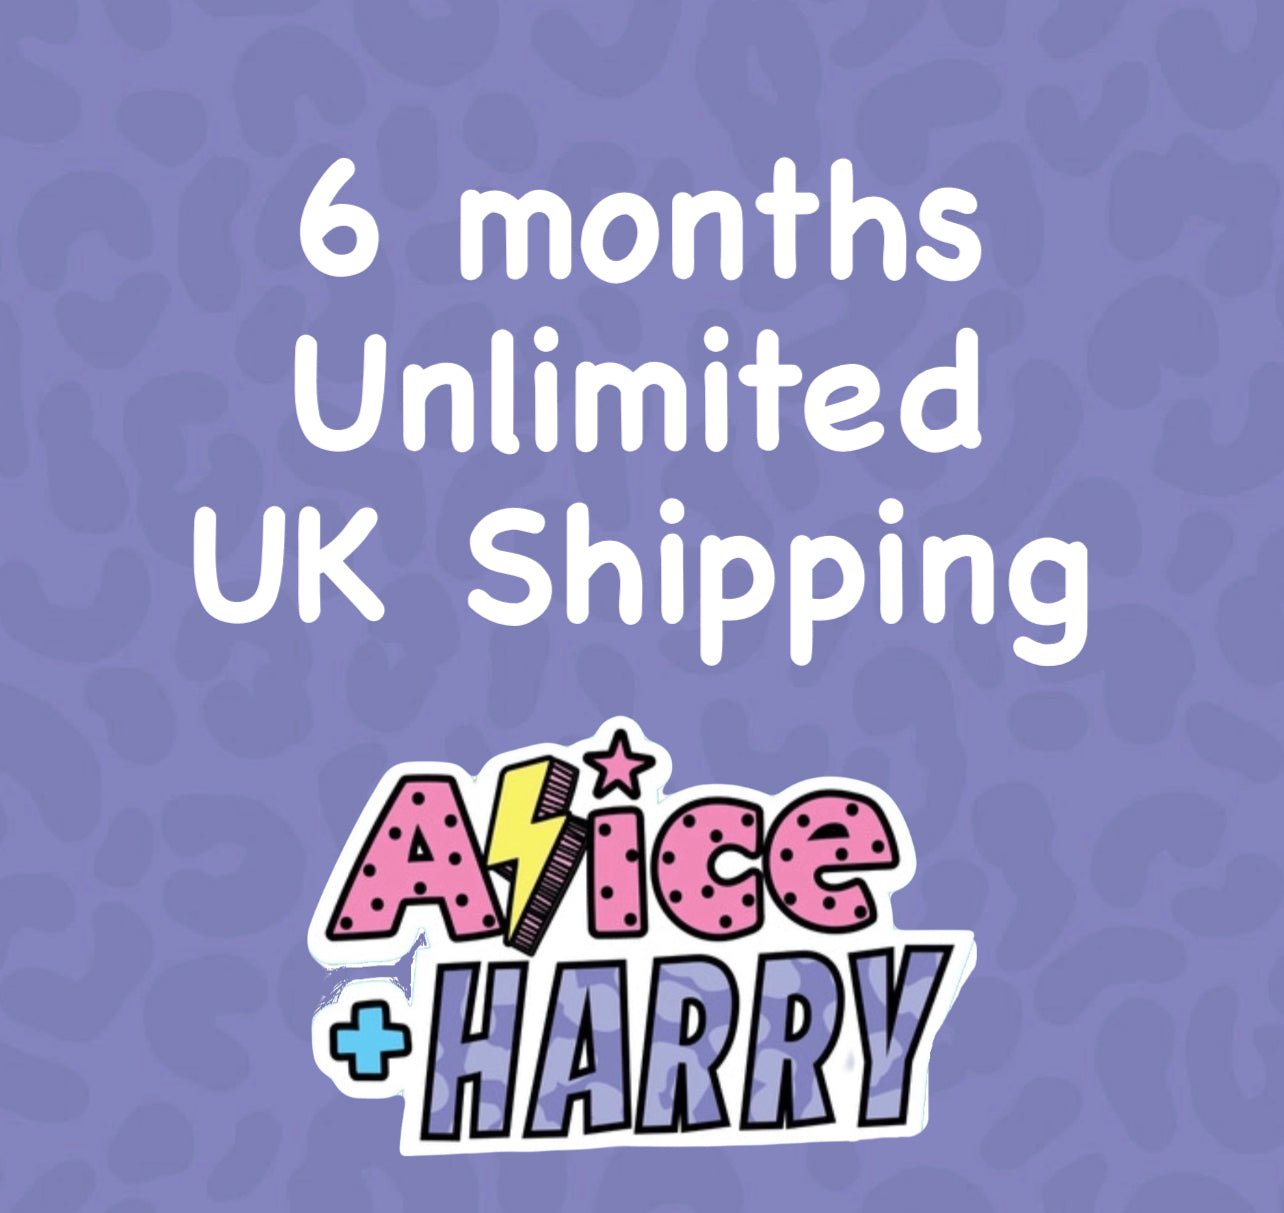 6 months Unlimited Standard UK Shipping!